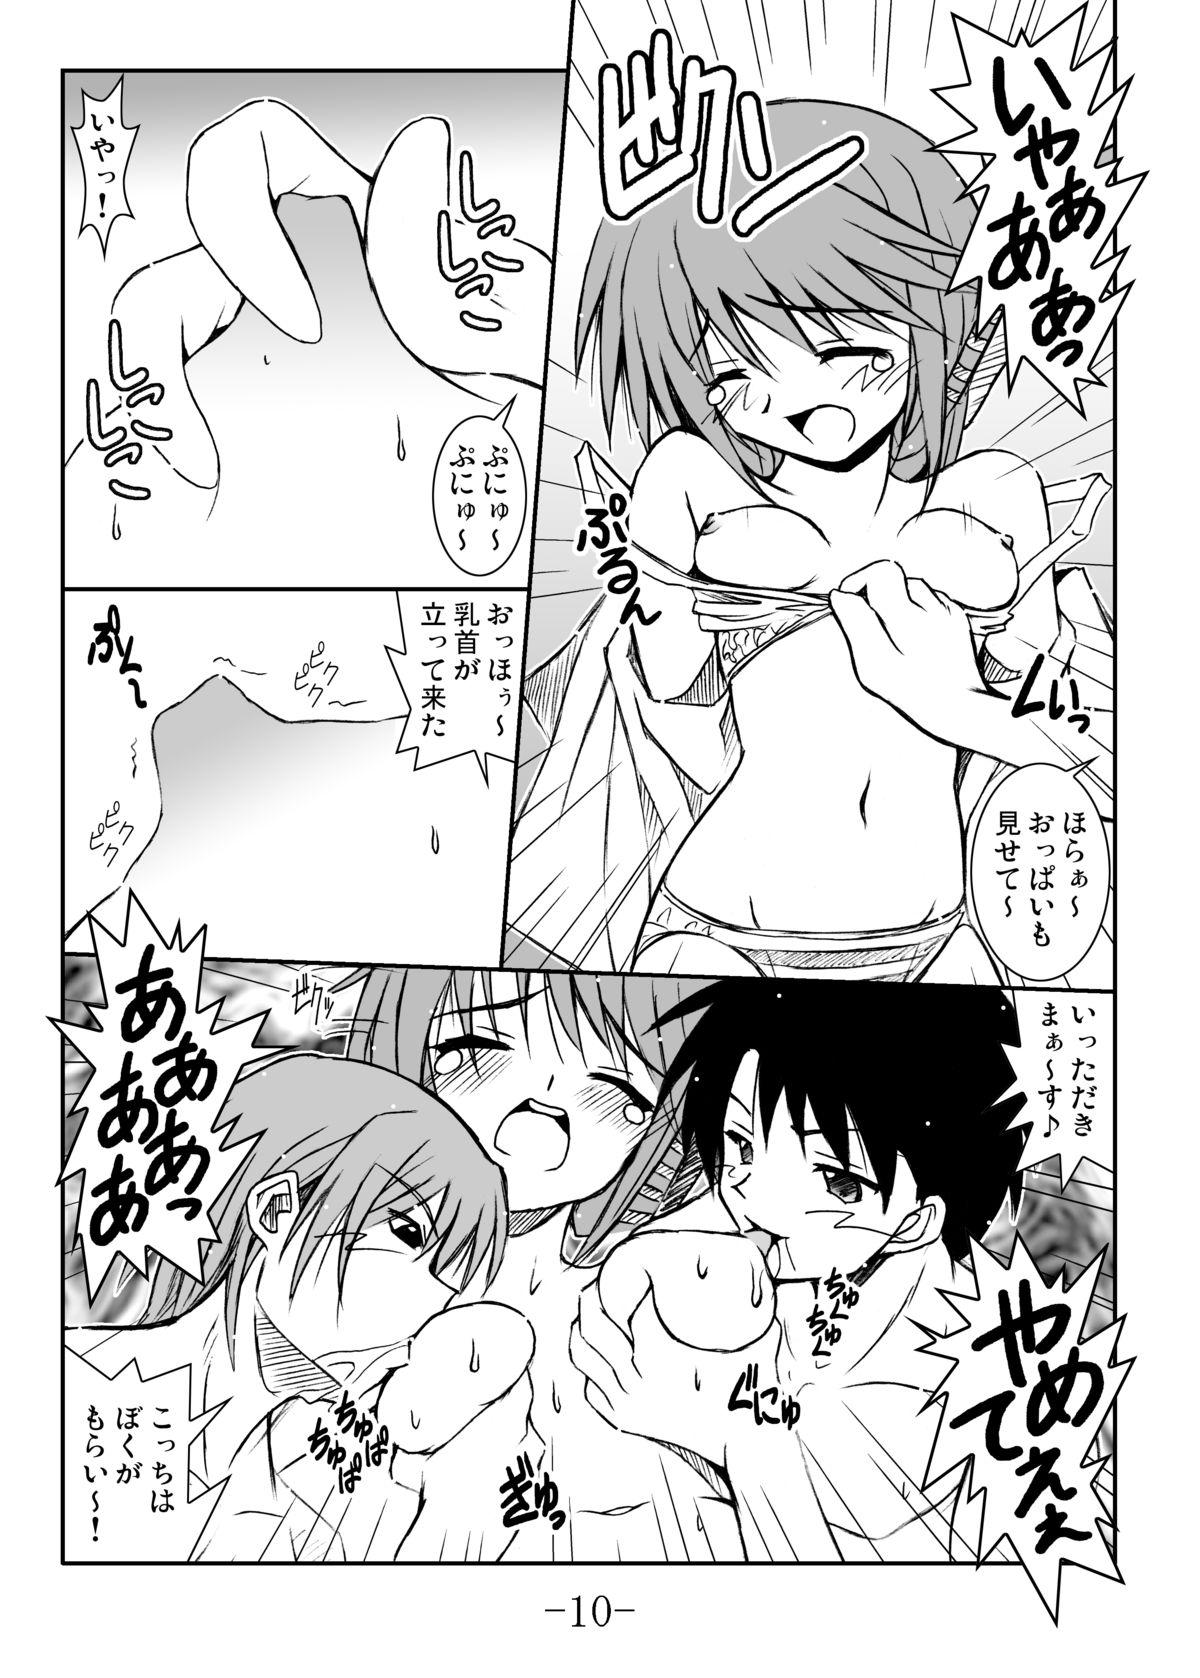 Close GURIMAGA’こまきちっく’ - Toheart2 Striptease - Page 10